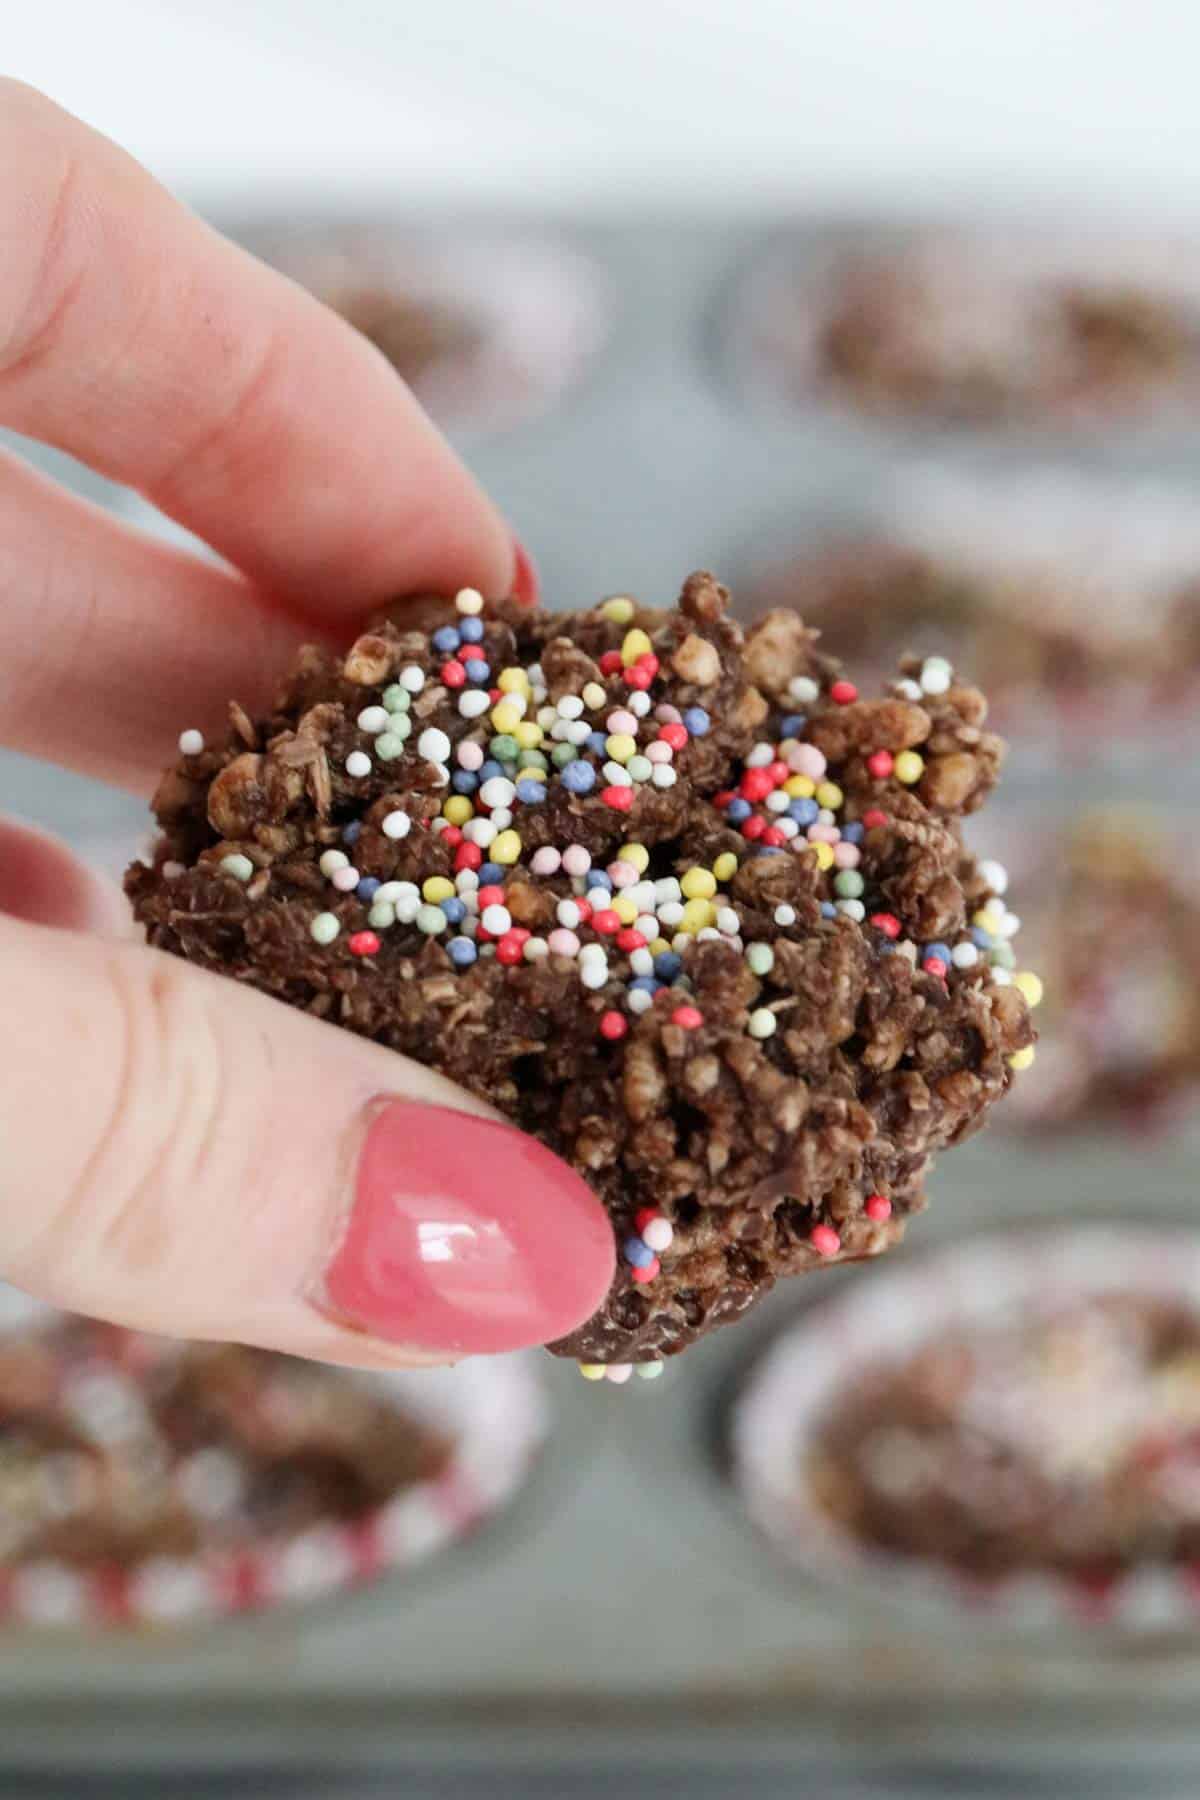 A hand holding a classic chocolate crackle.